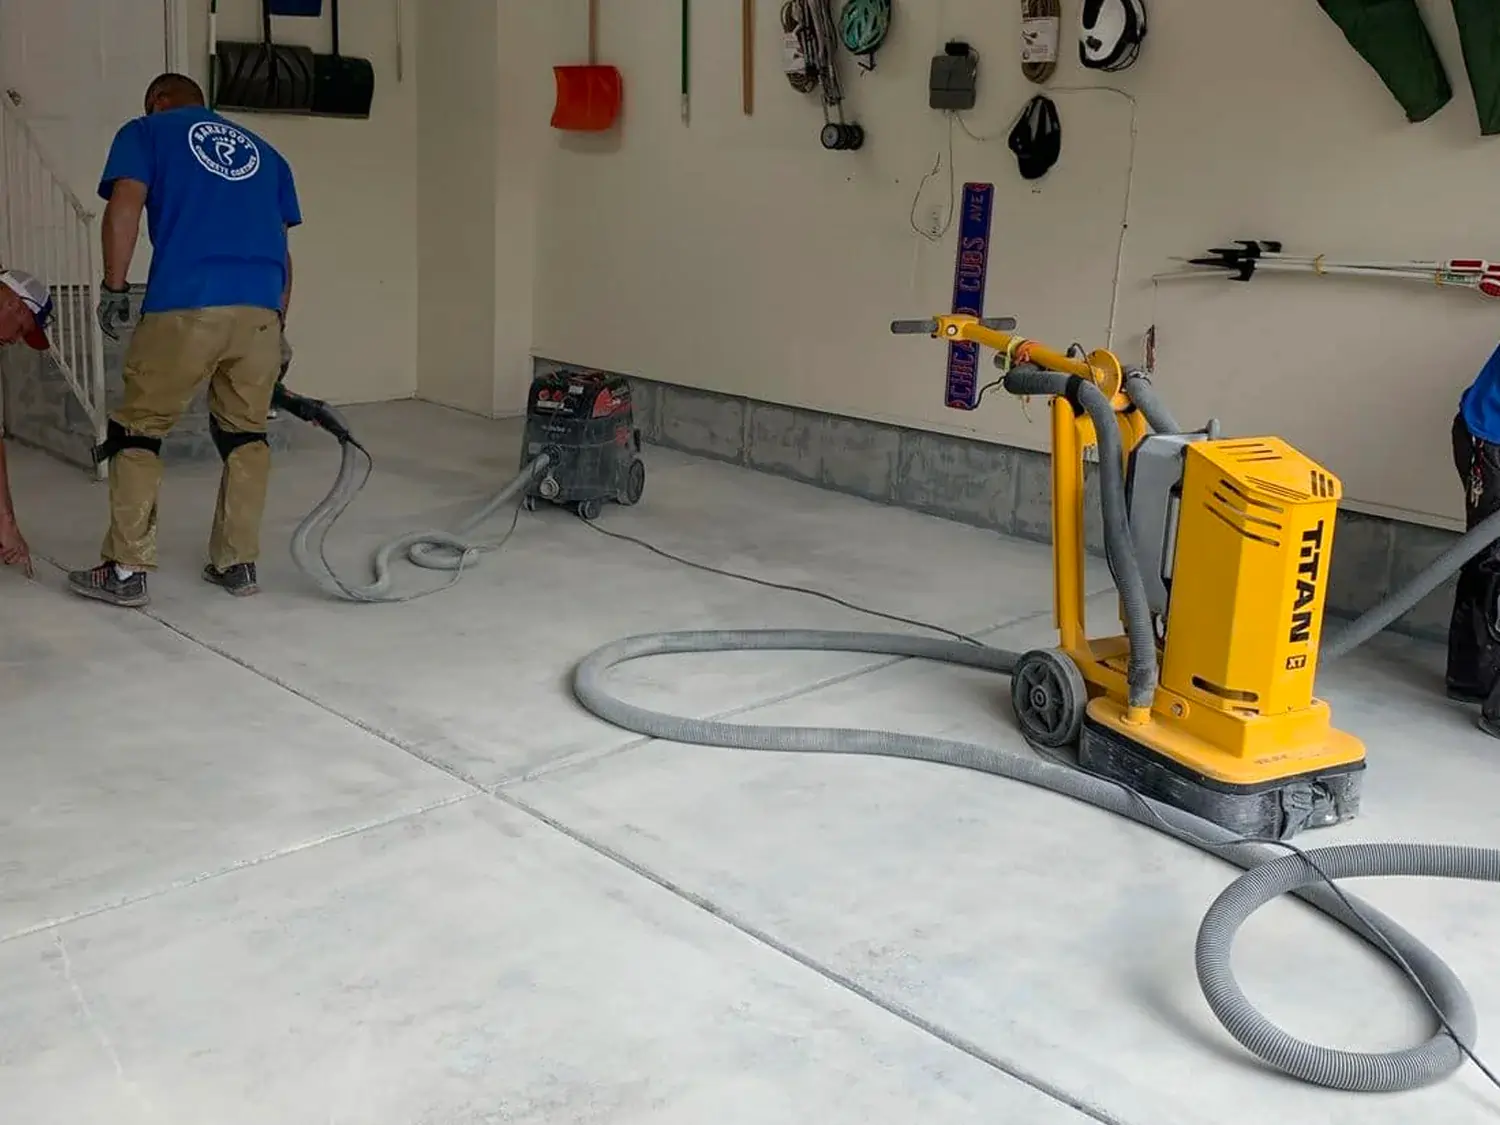 A professional working on a concrete floor in the garage using an equipment.